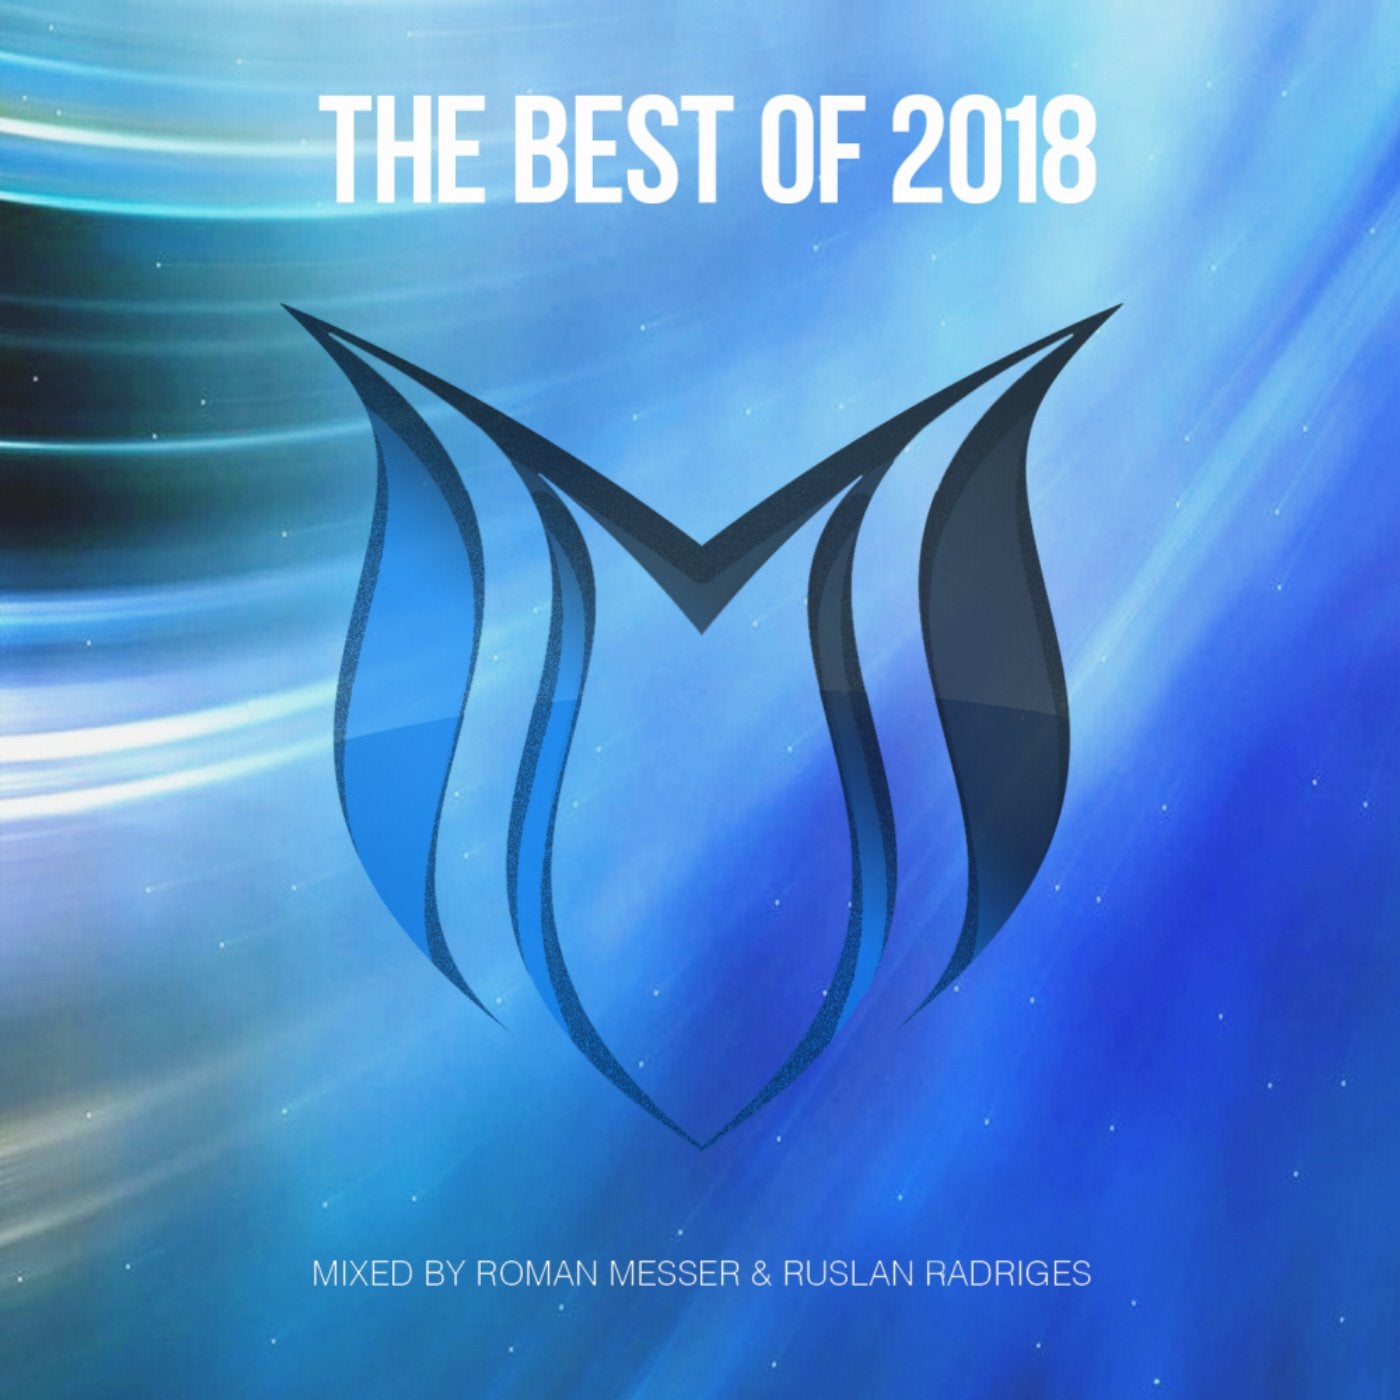 The Best Of Suanda Music 2018 - Mixed By Roman Messer & Ruslan Radriges